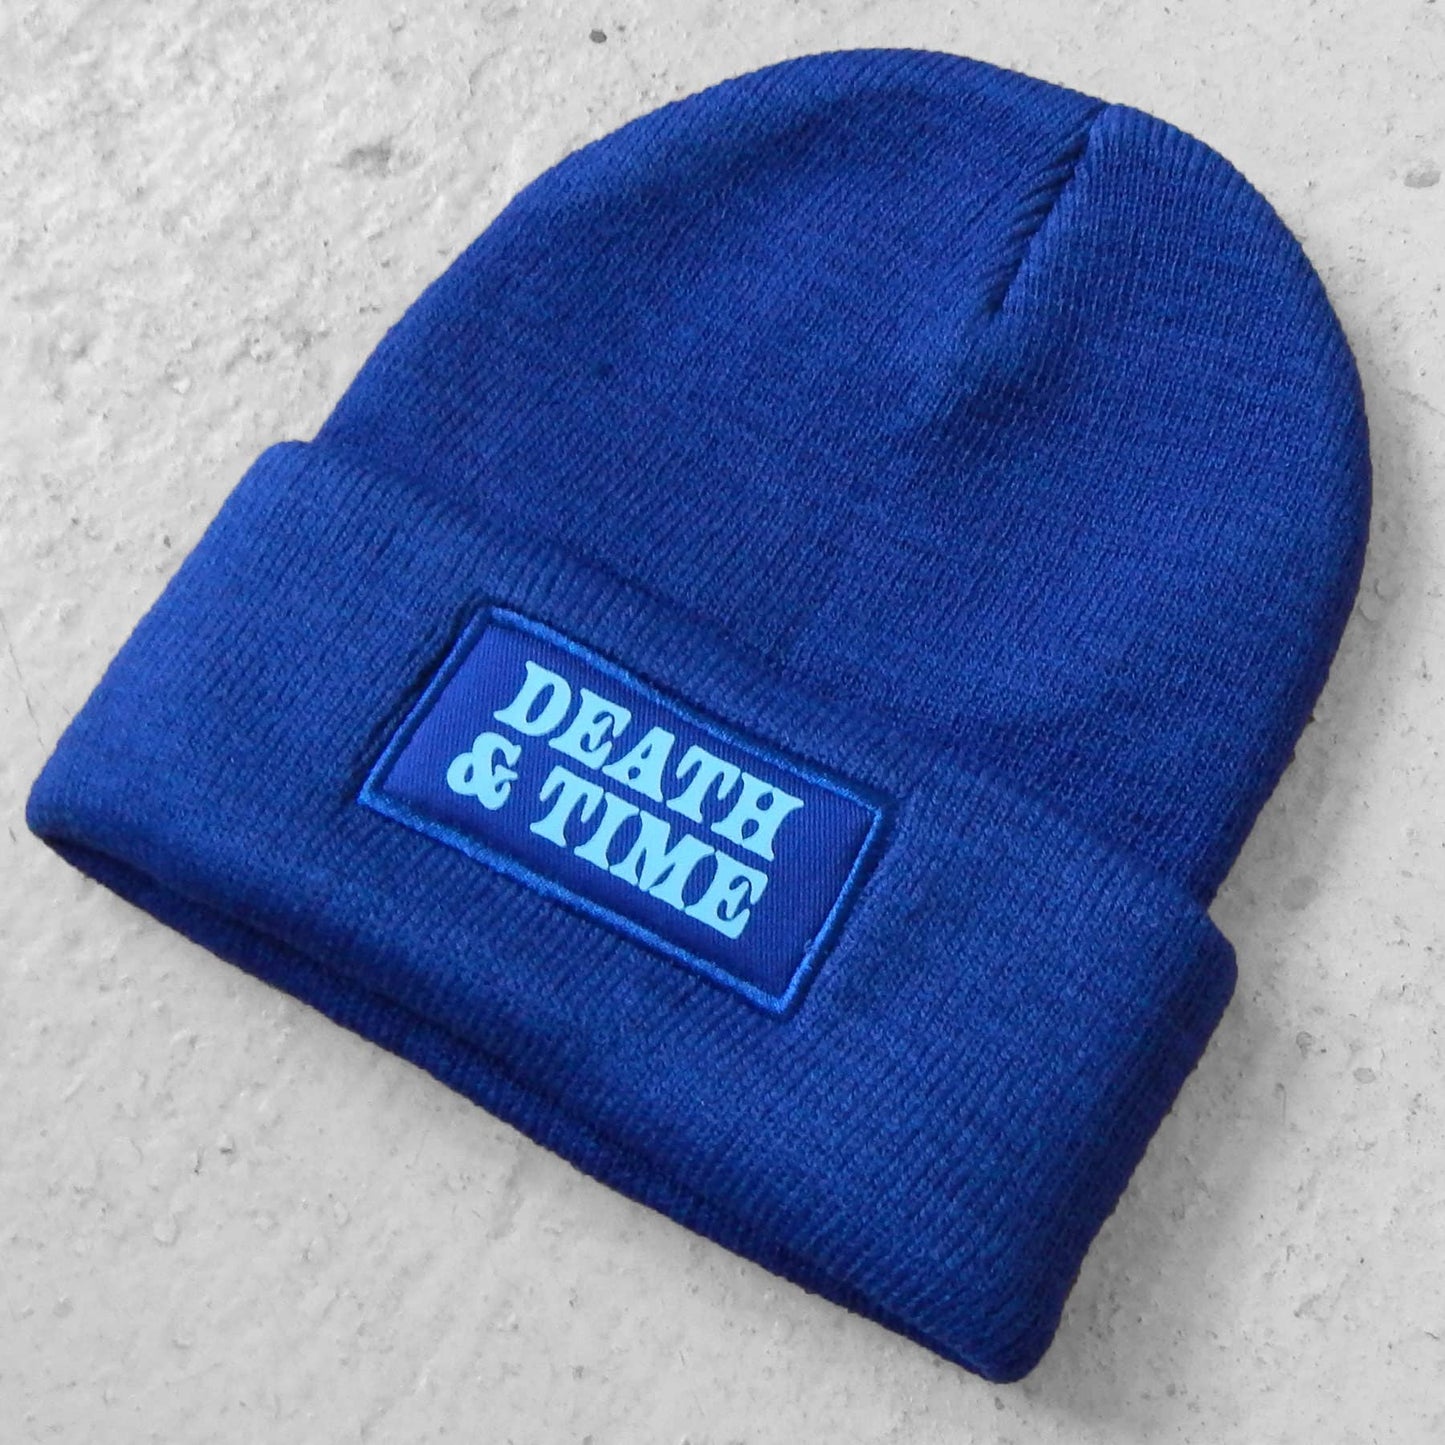 Death and Time Beanie: Forest Green